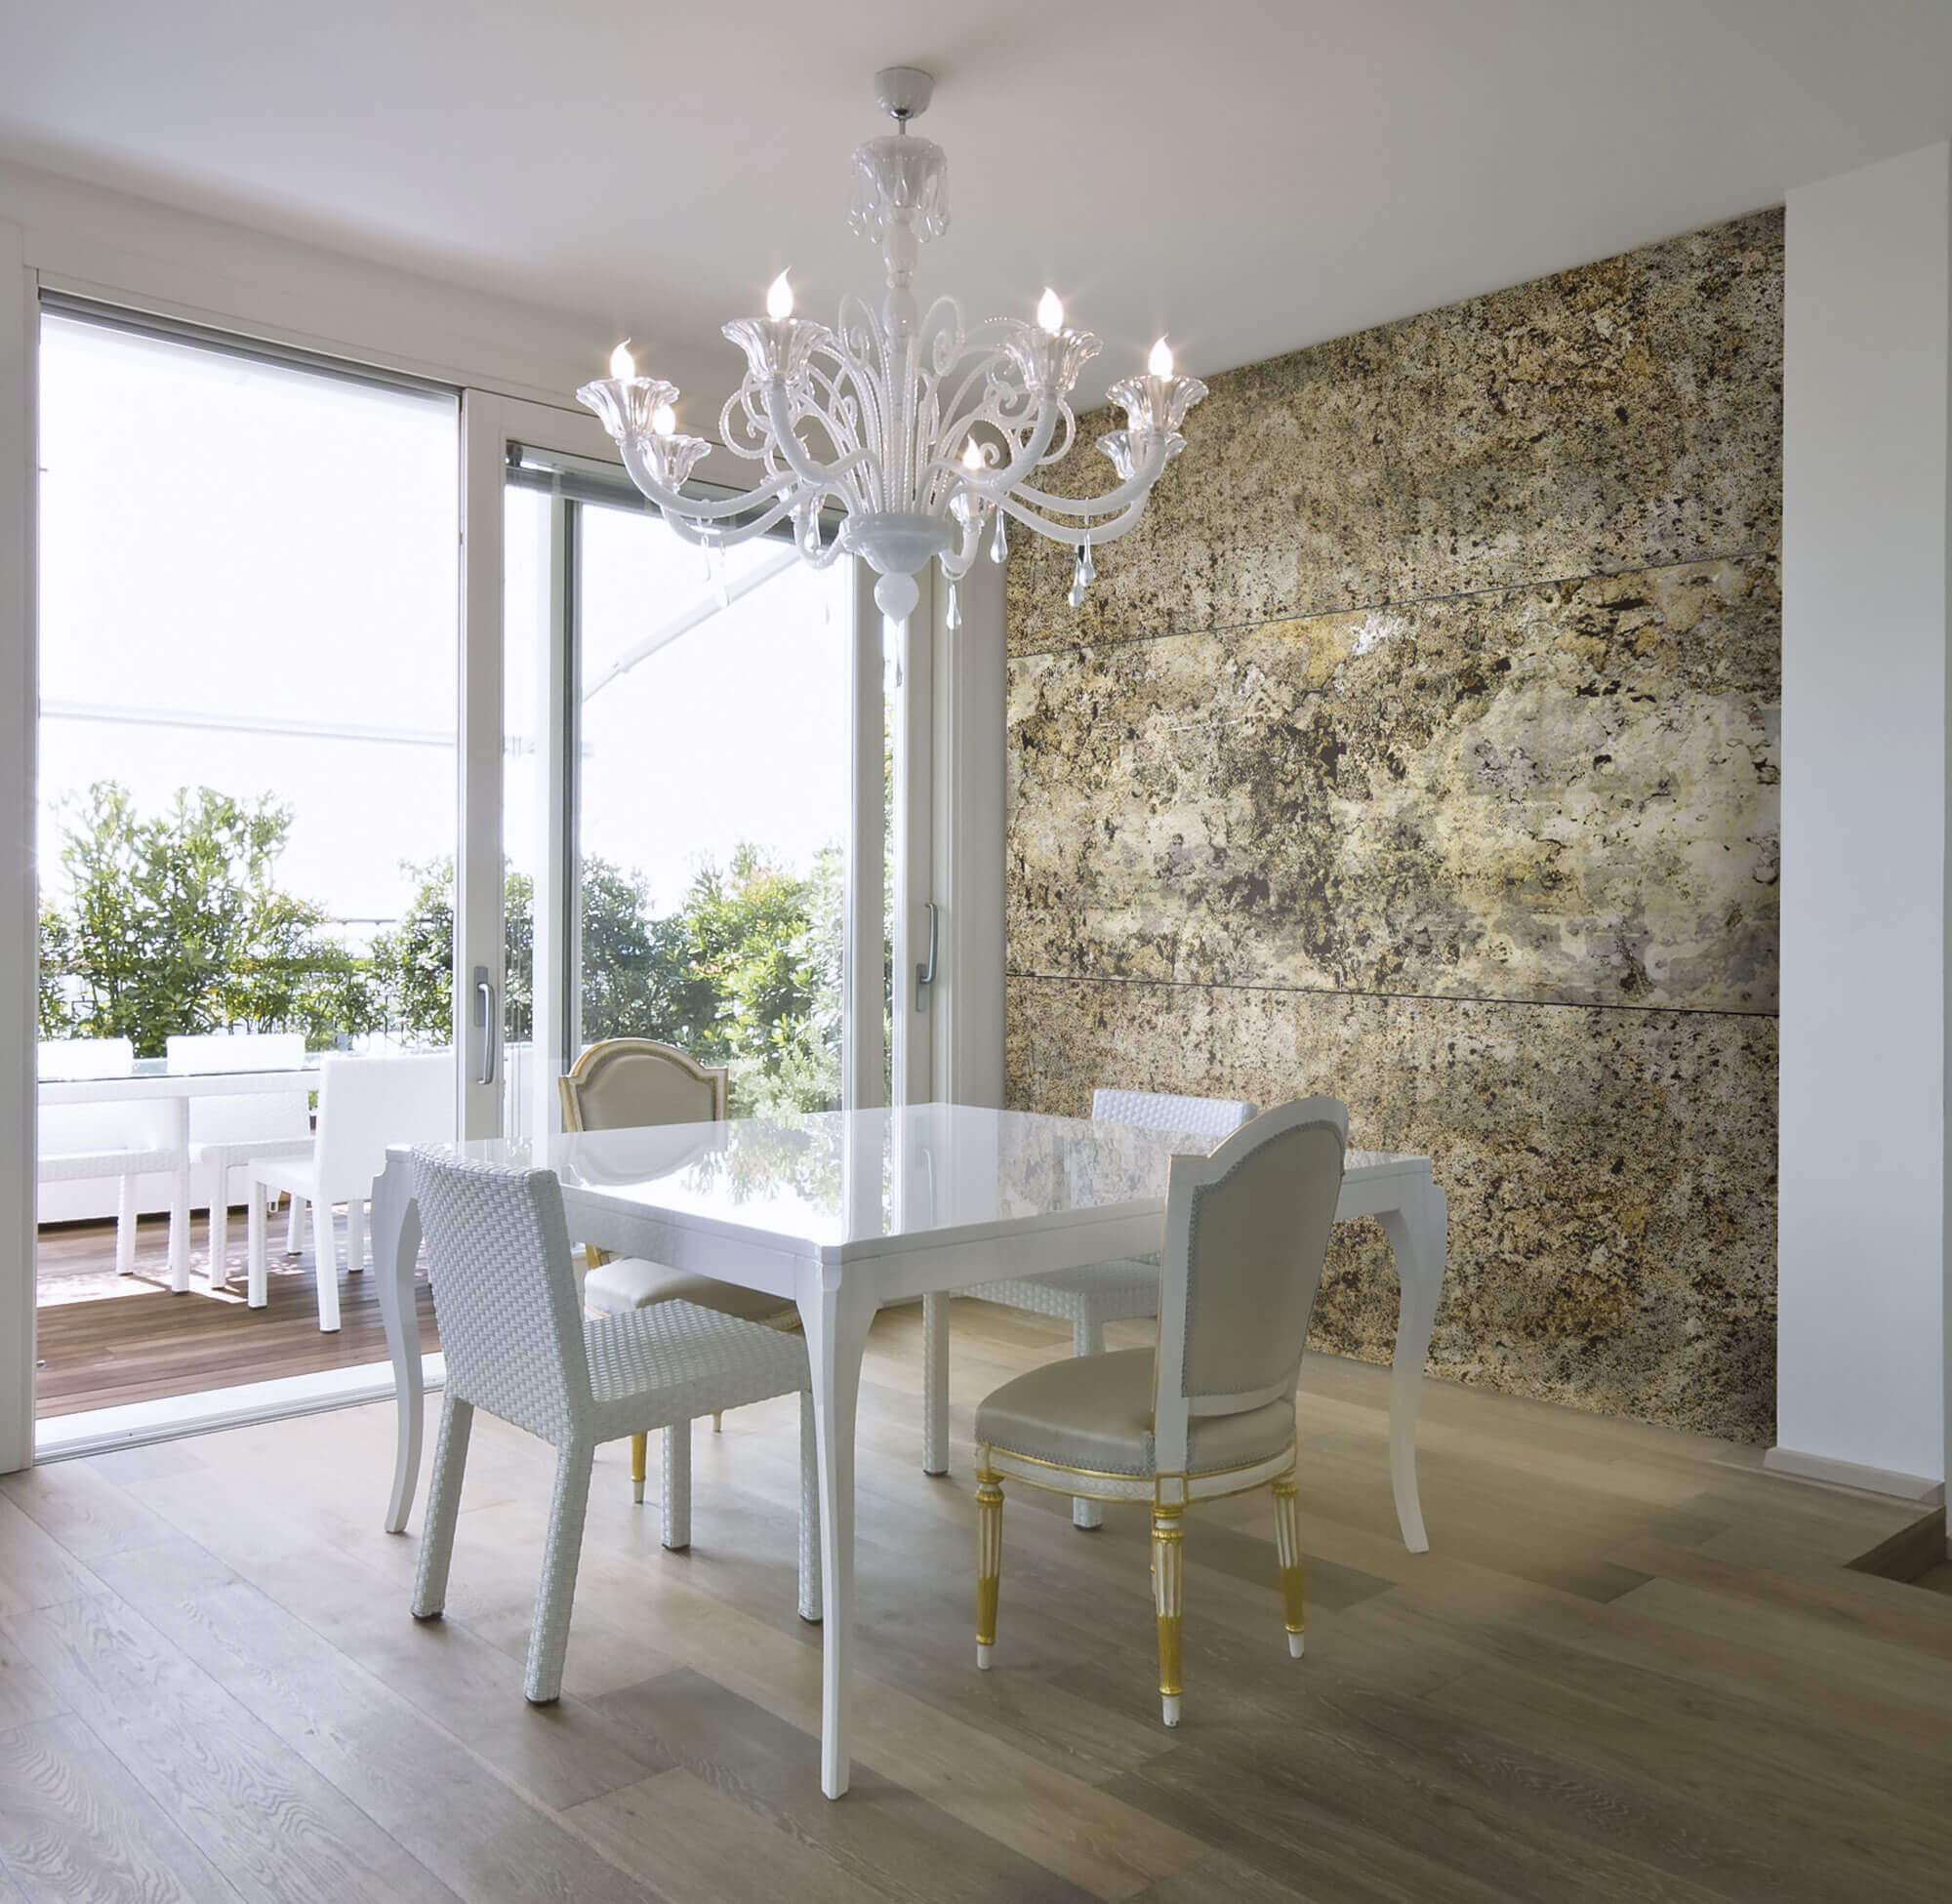 AMBIENTE 1 FSG1007 encendida - Halls with natural stone